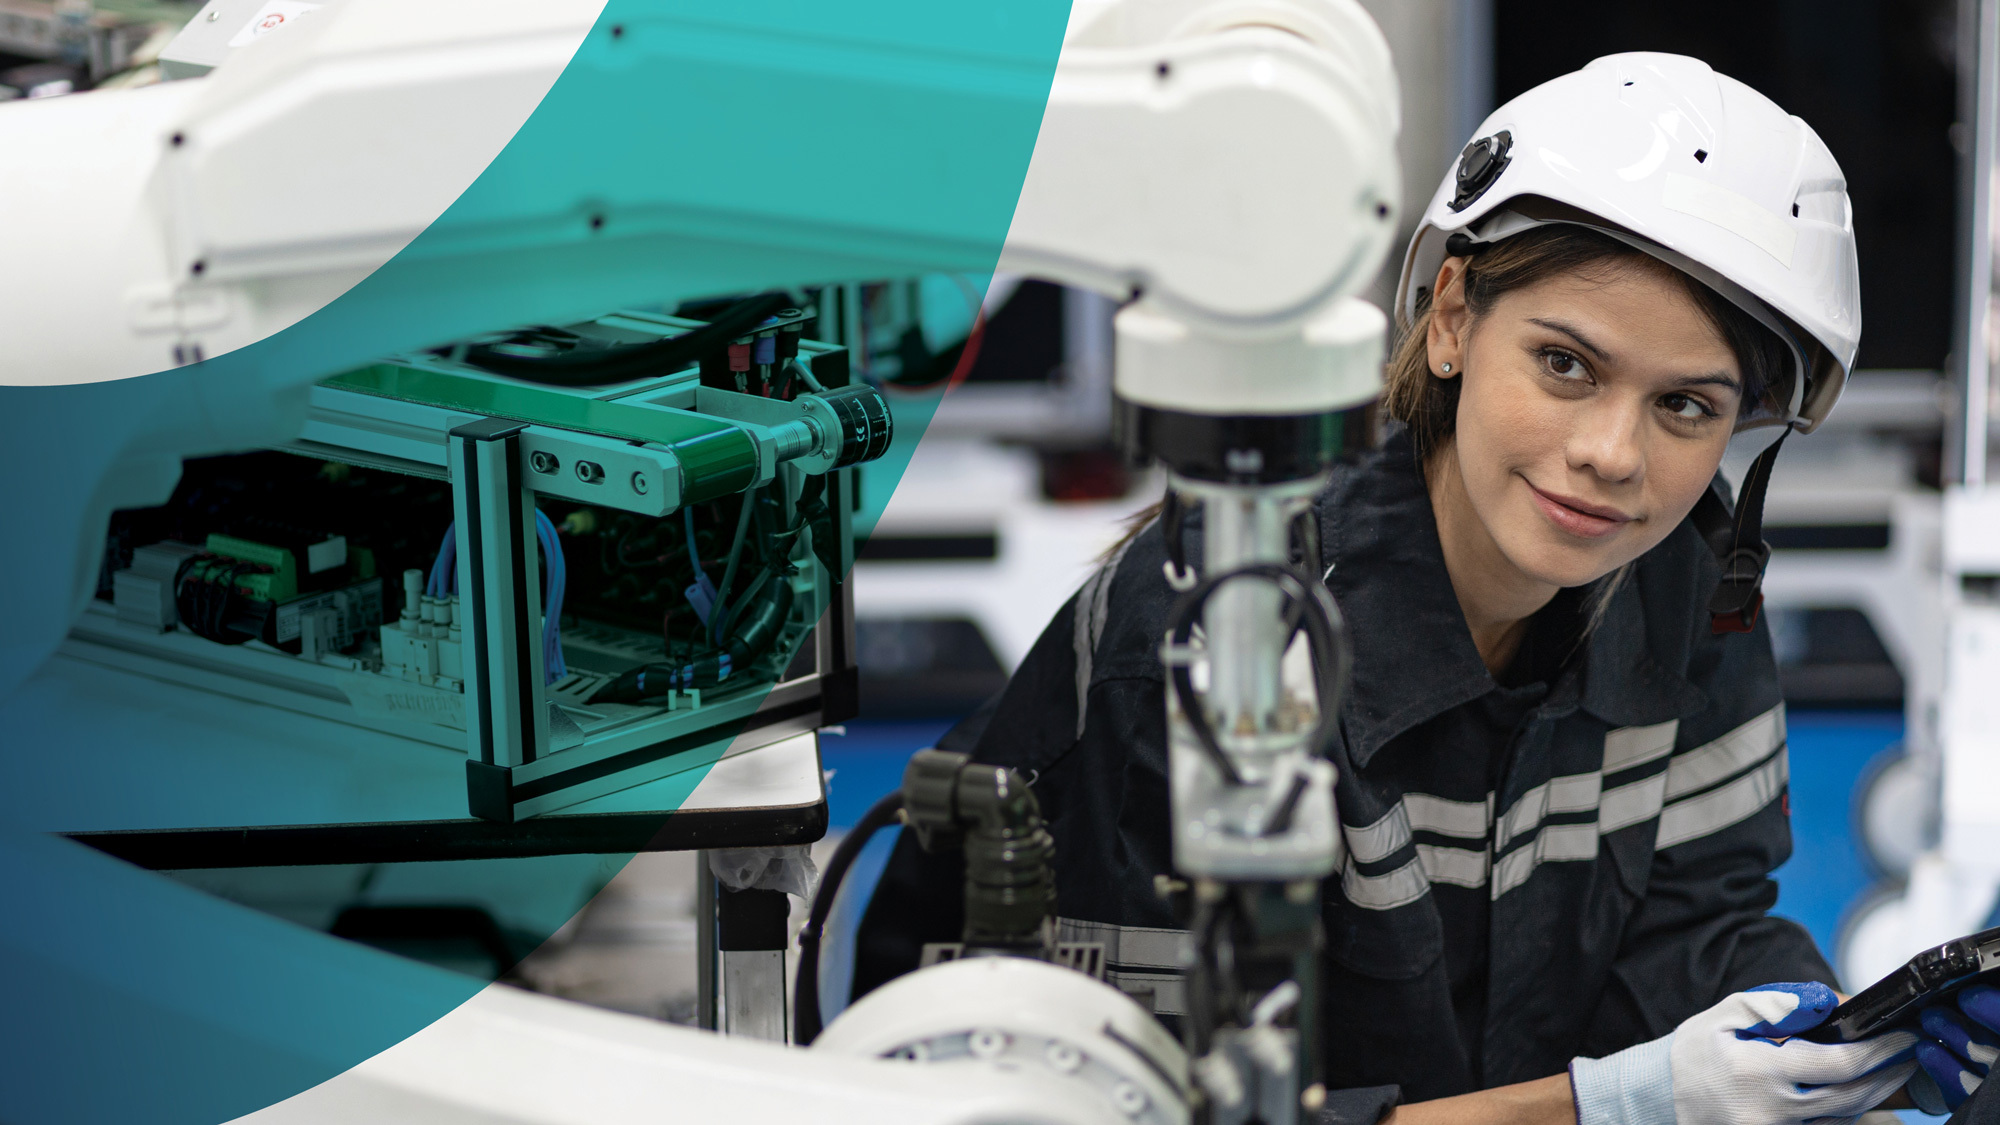 An engineer wearing a white safety helmet controls a robotic machine that sits to the persons rights, representing a PhD candidate for the National Industry PhD program.